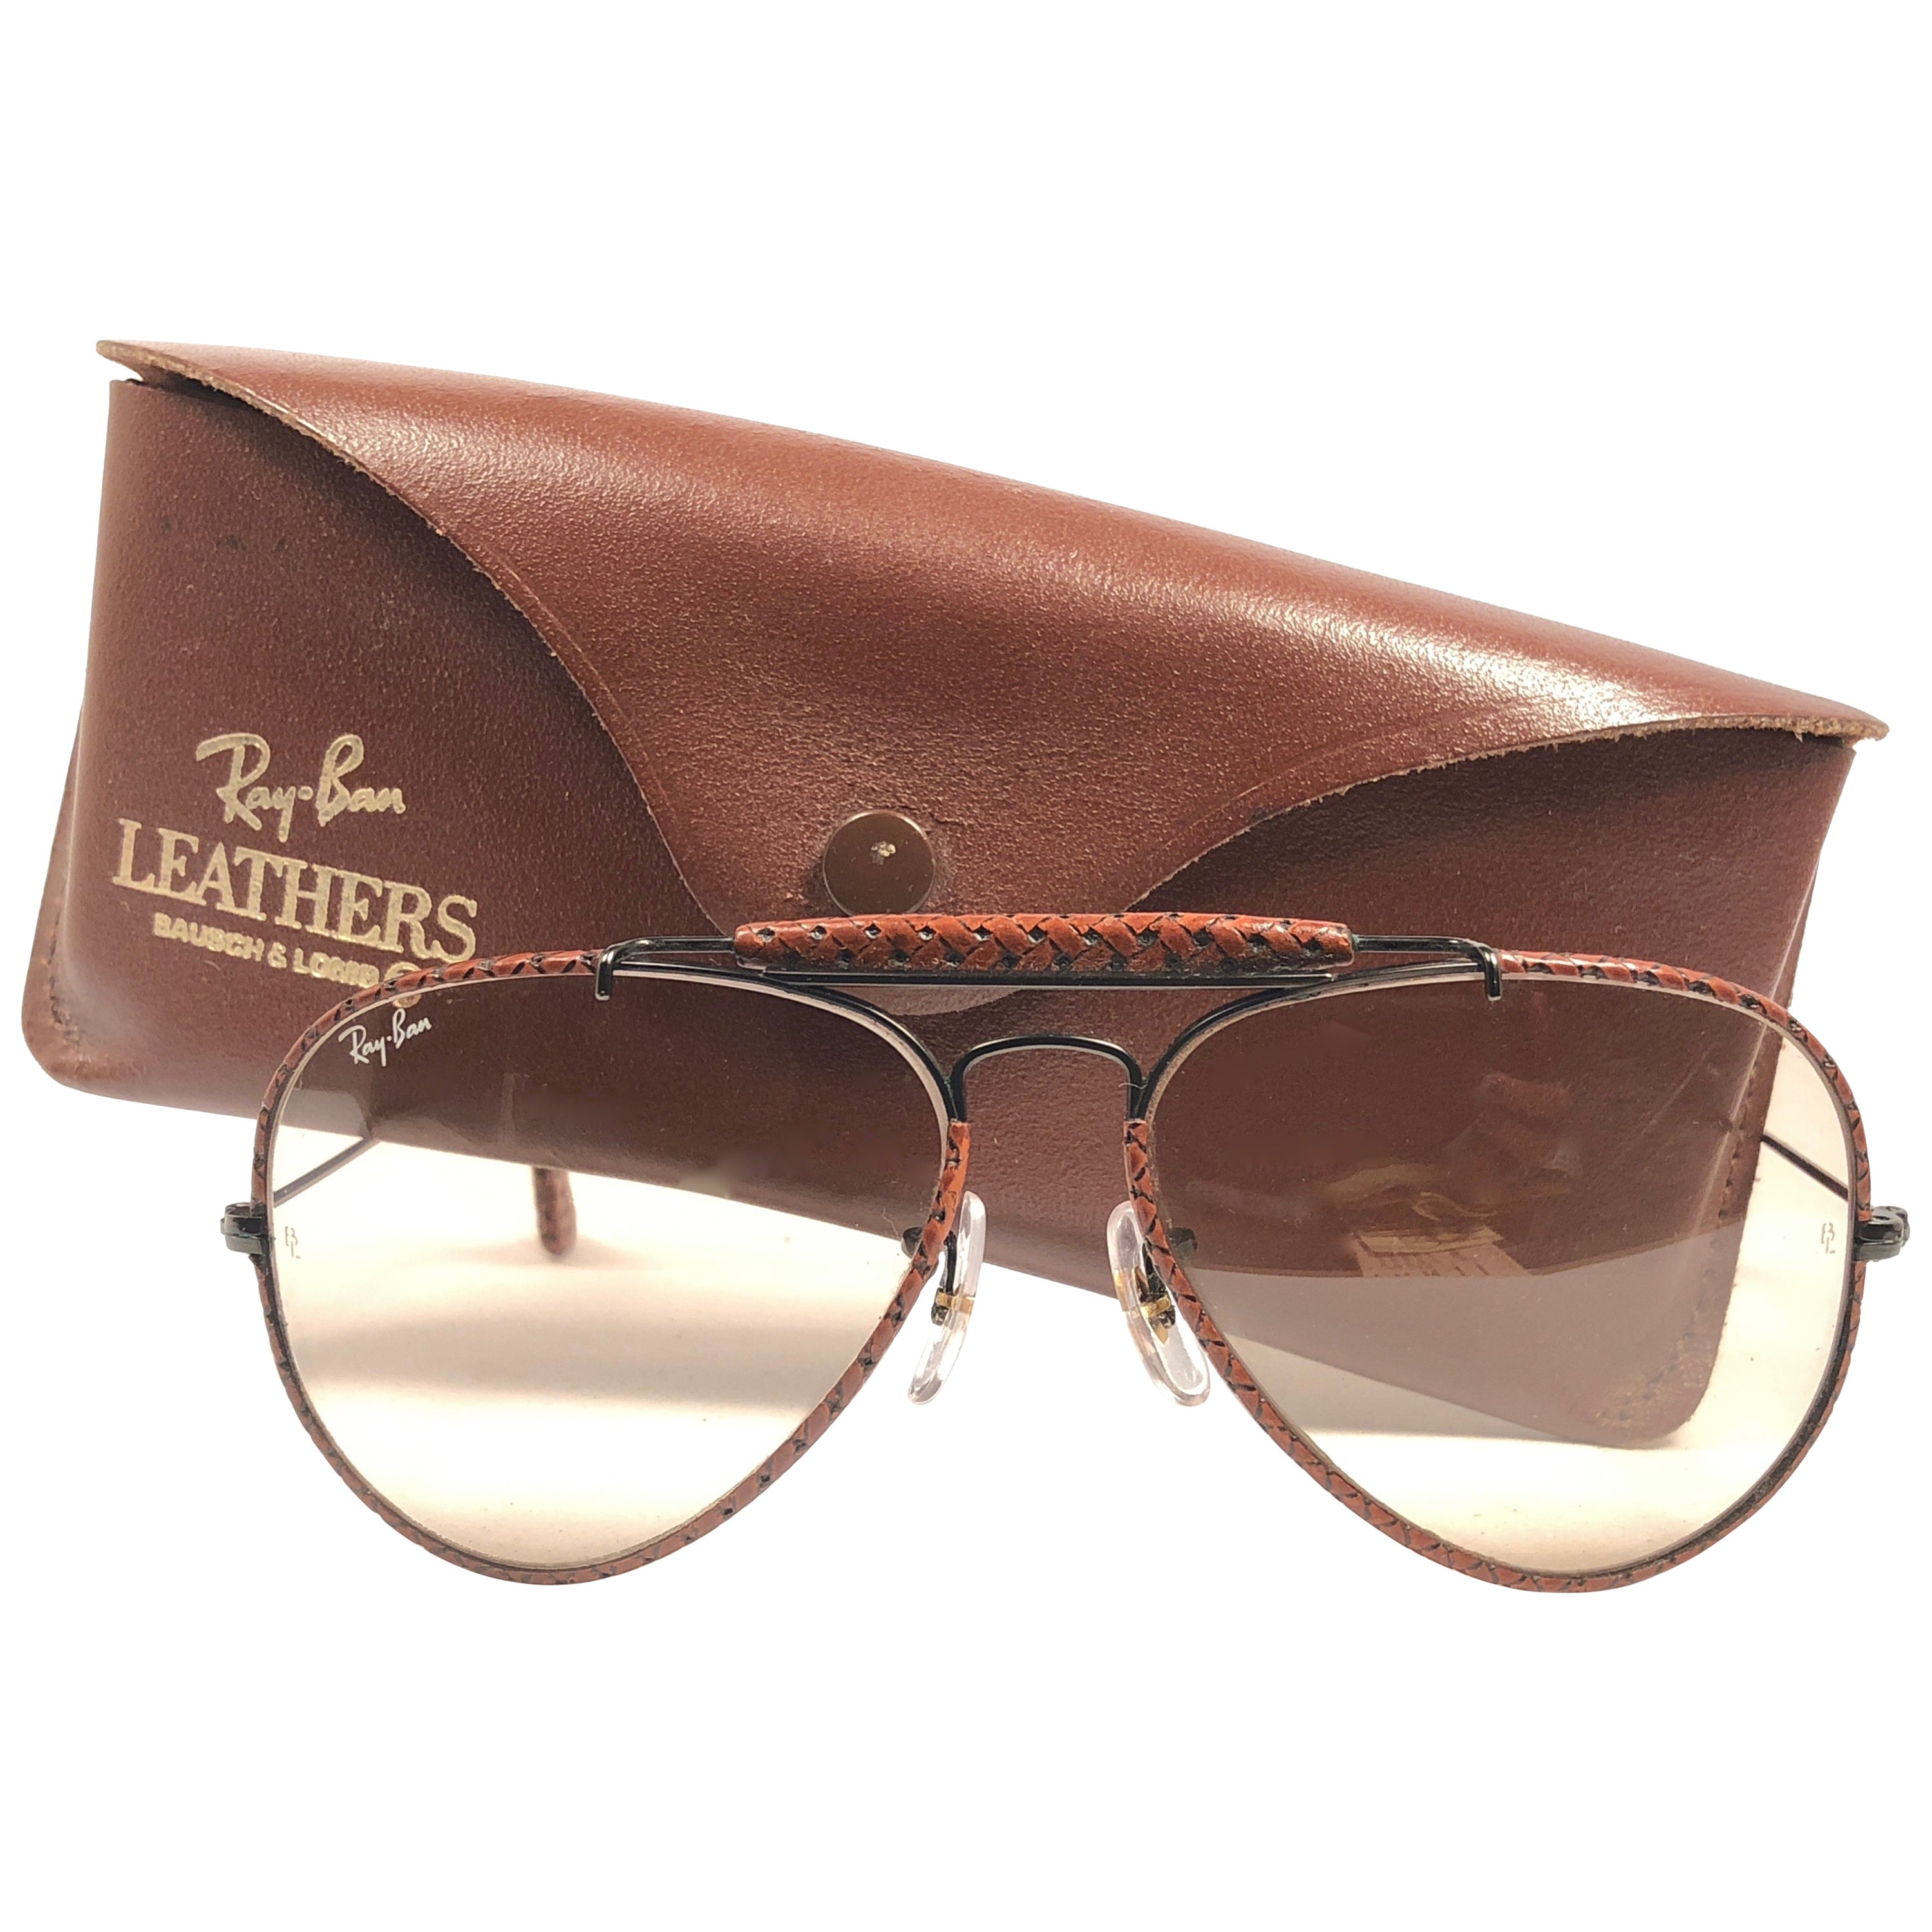 ray ban leathers bausch & lomb